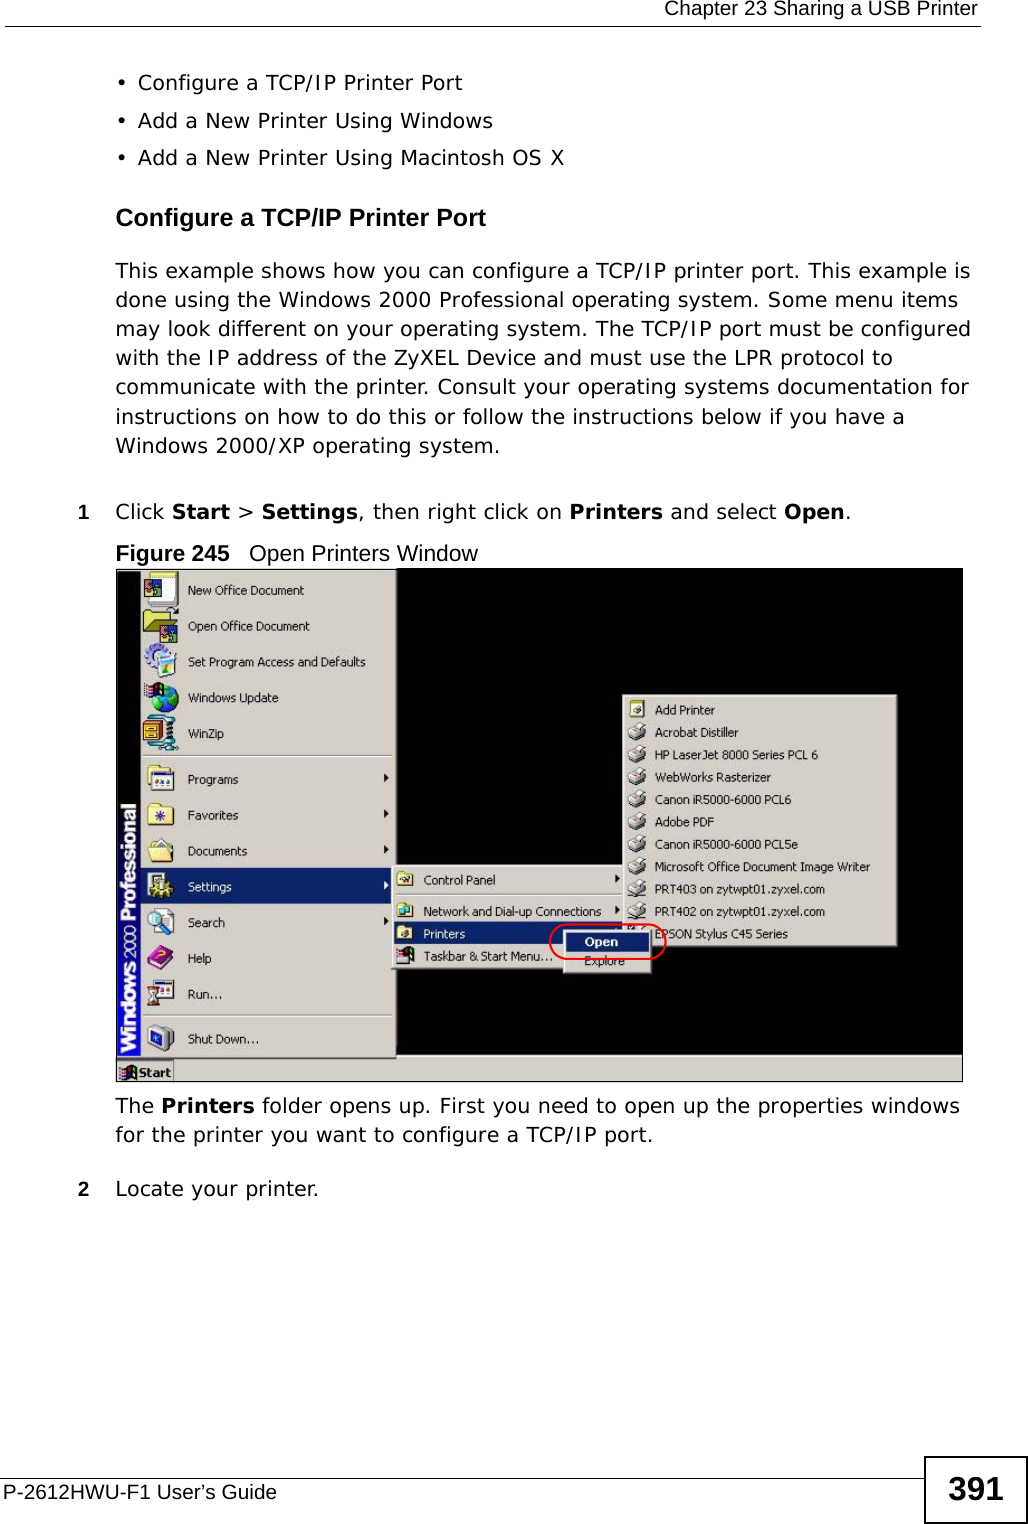  Chapter 23 Sharing a USB PrinterP-2612HWU-F1 User’s Guide 391• Configure a TCP/IP Printer Port• Add a New Printer Using Windows• Add a New Printer Using Macintosh OS XConfigure a TCP/IP Printer PortThis example shows how you can configure a TCP/IP printer port. This example is done using the Windows 2000 Professional operating system. Some menu items may look different on your operating system. The TCP/IP port must be configured with the IP address of the ZyXEL Device and must use the LPR protocol to communicate with the printer. Consult your operating systems documentation for instructions on how to do this or follow the instructions below if you have a Windows 2000/XP operating system. 1Click Start &gt; Settings, then right click on Printers and select Open.Figure 245   Open Printers WindowThe Printers folder opens up. First you need to open up the properties windows for the printer you want to configure a TCP/IP port.2Locate your printer.